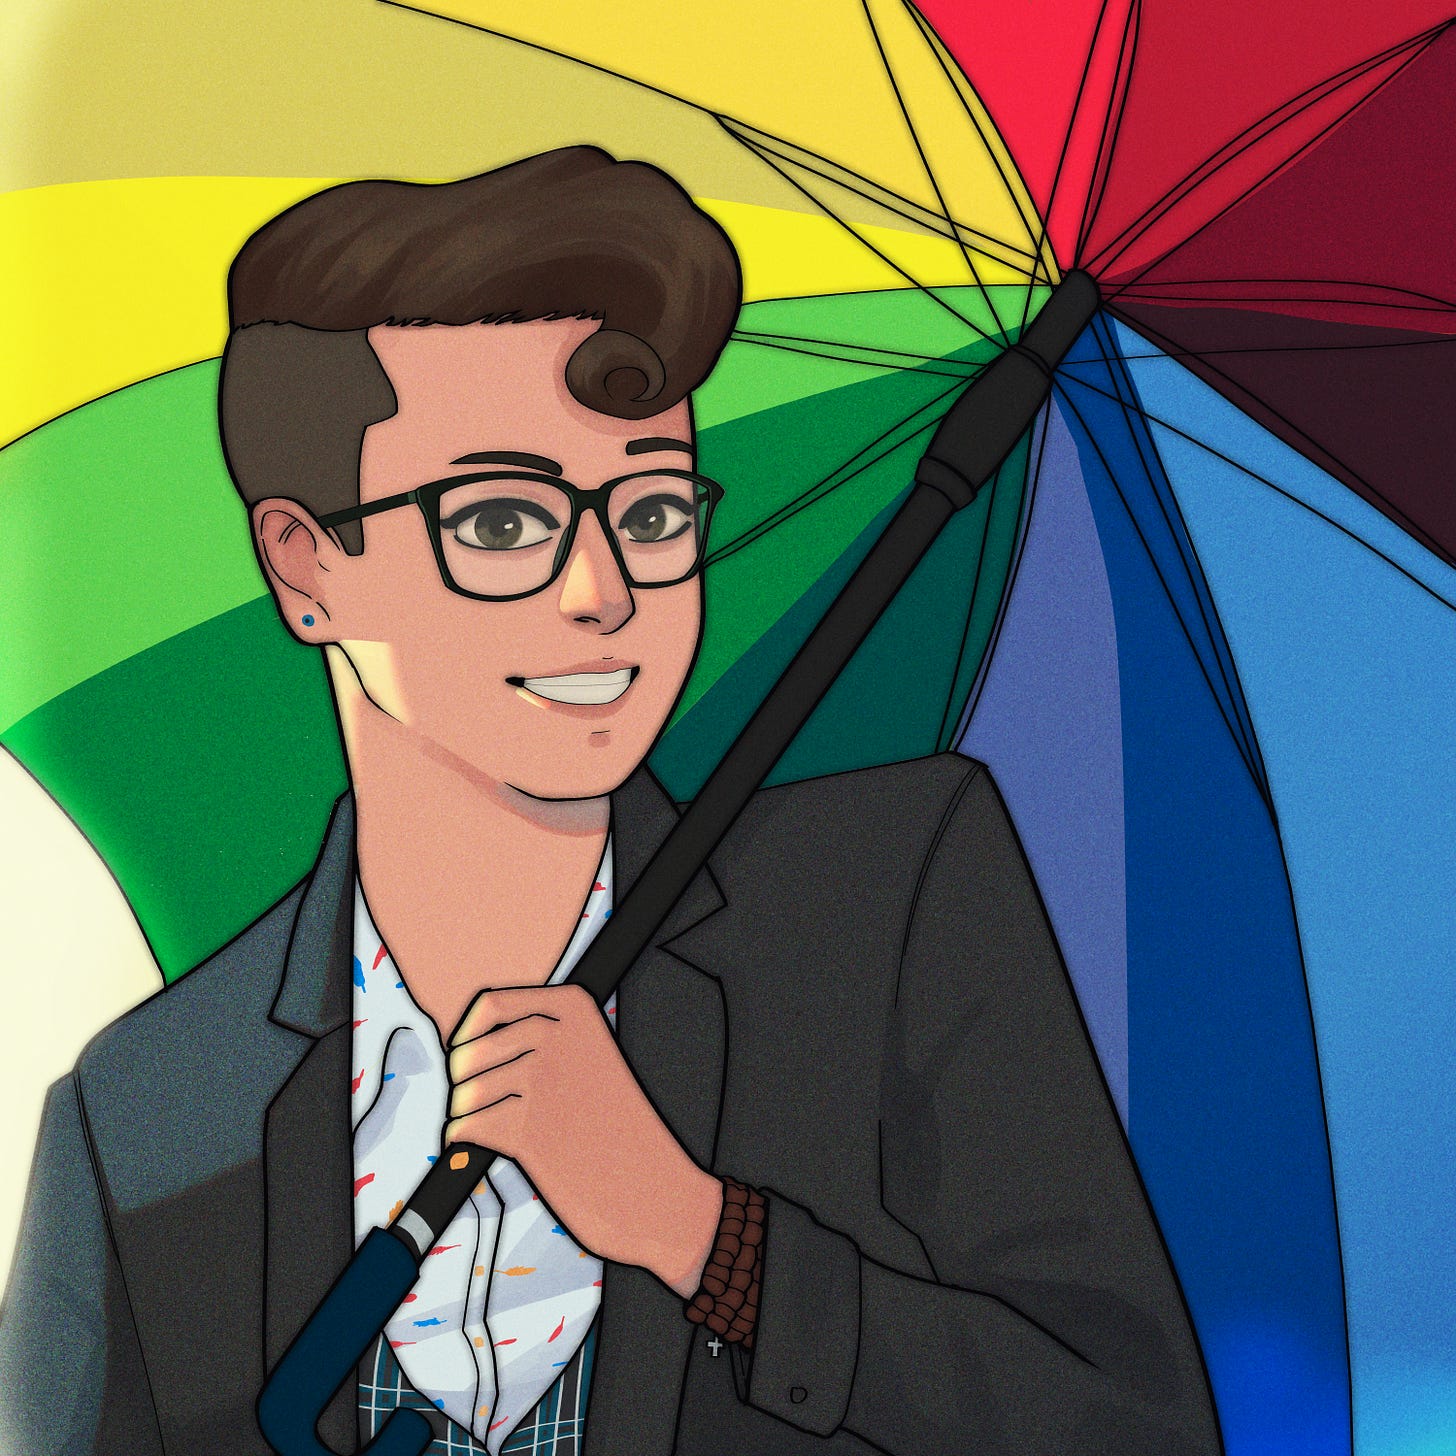 Digital drawing of KSCHatch, a white genderqueer person with short, dark brown hair that curls at the front. They are holding a rainbow umbrella, wearing glasses, and a suit jacket and waistcoat over a patterned white button down shirt. 